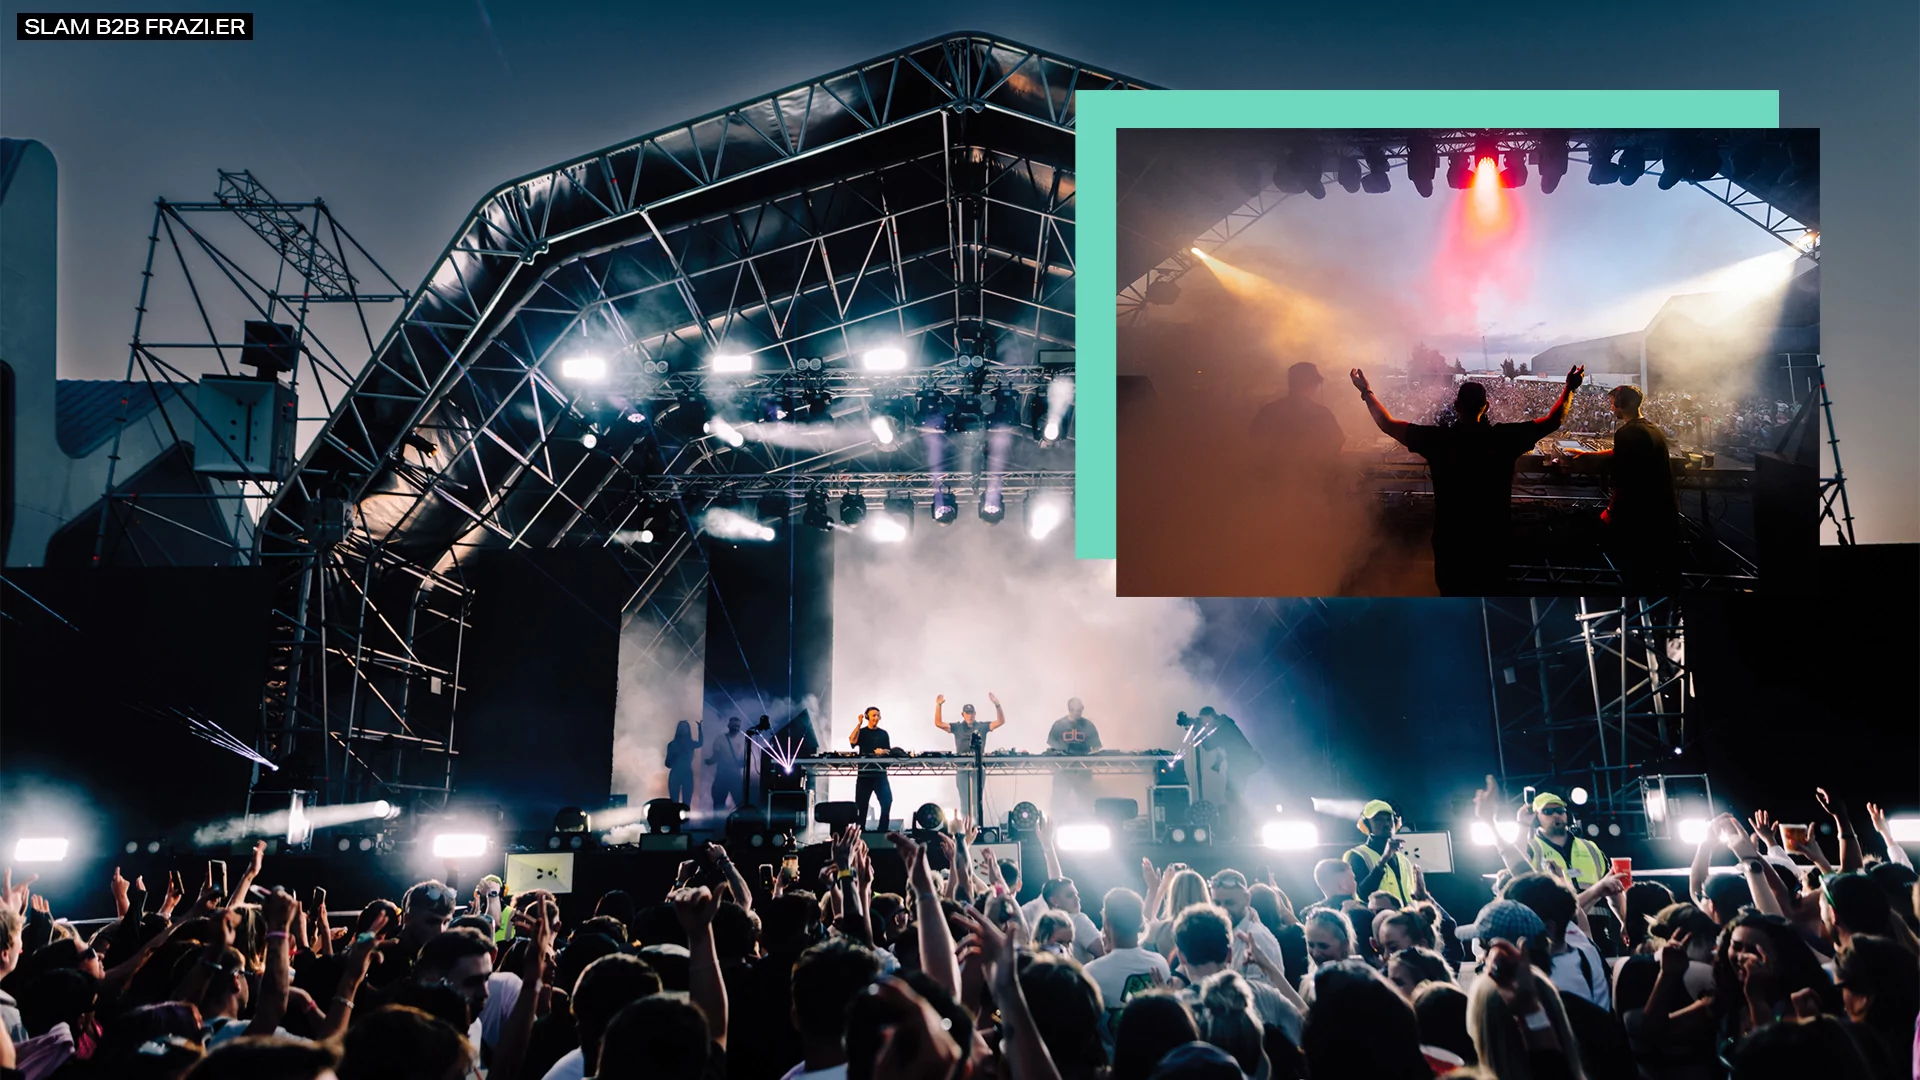 two photos of slam playing b2b with fr.azier on the riverside mainstage